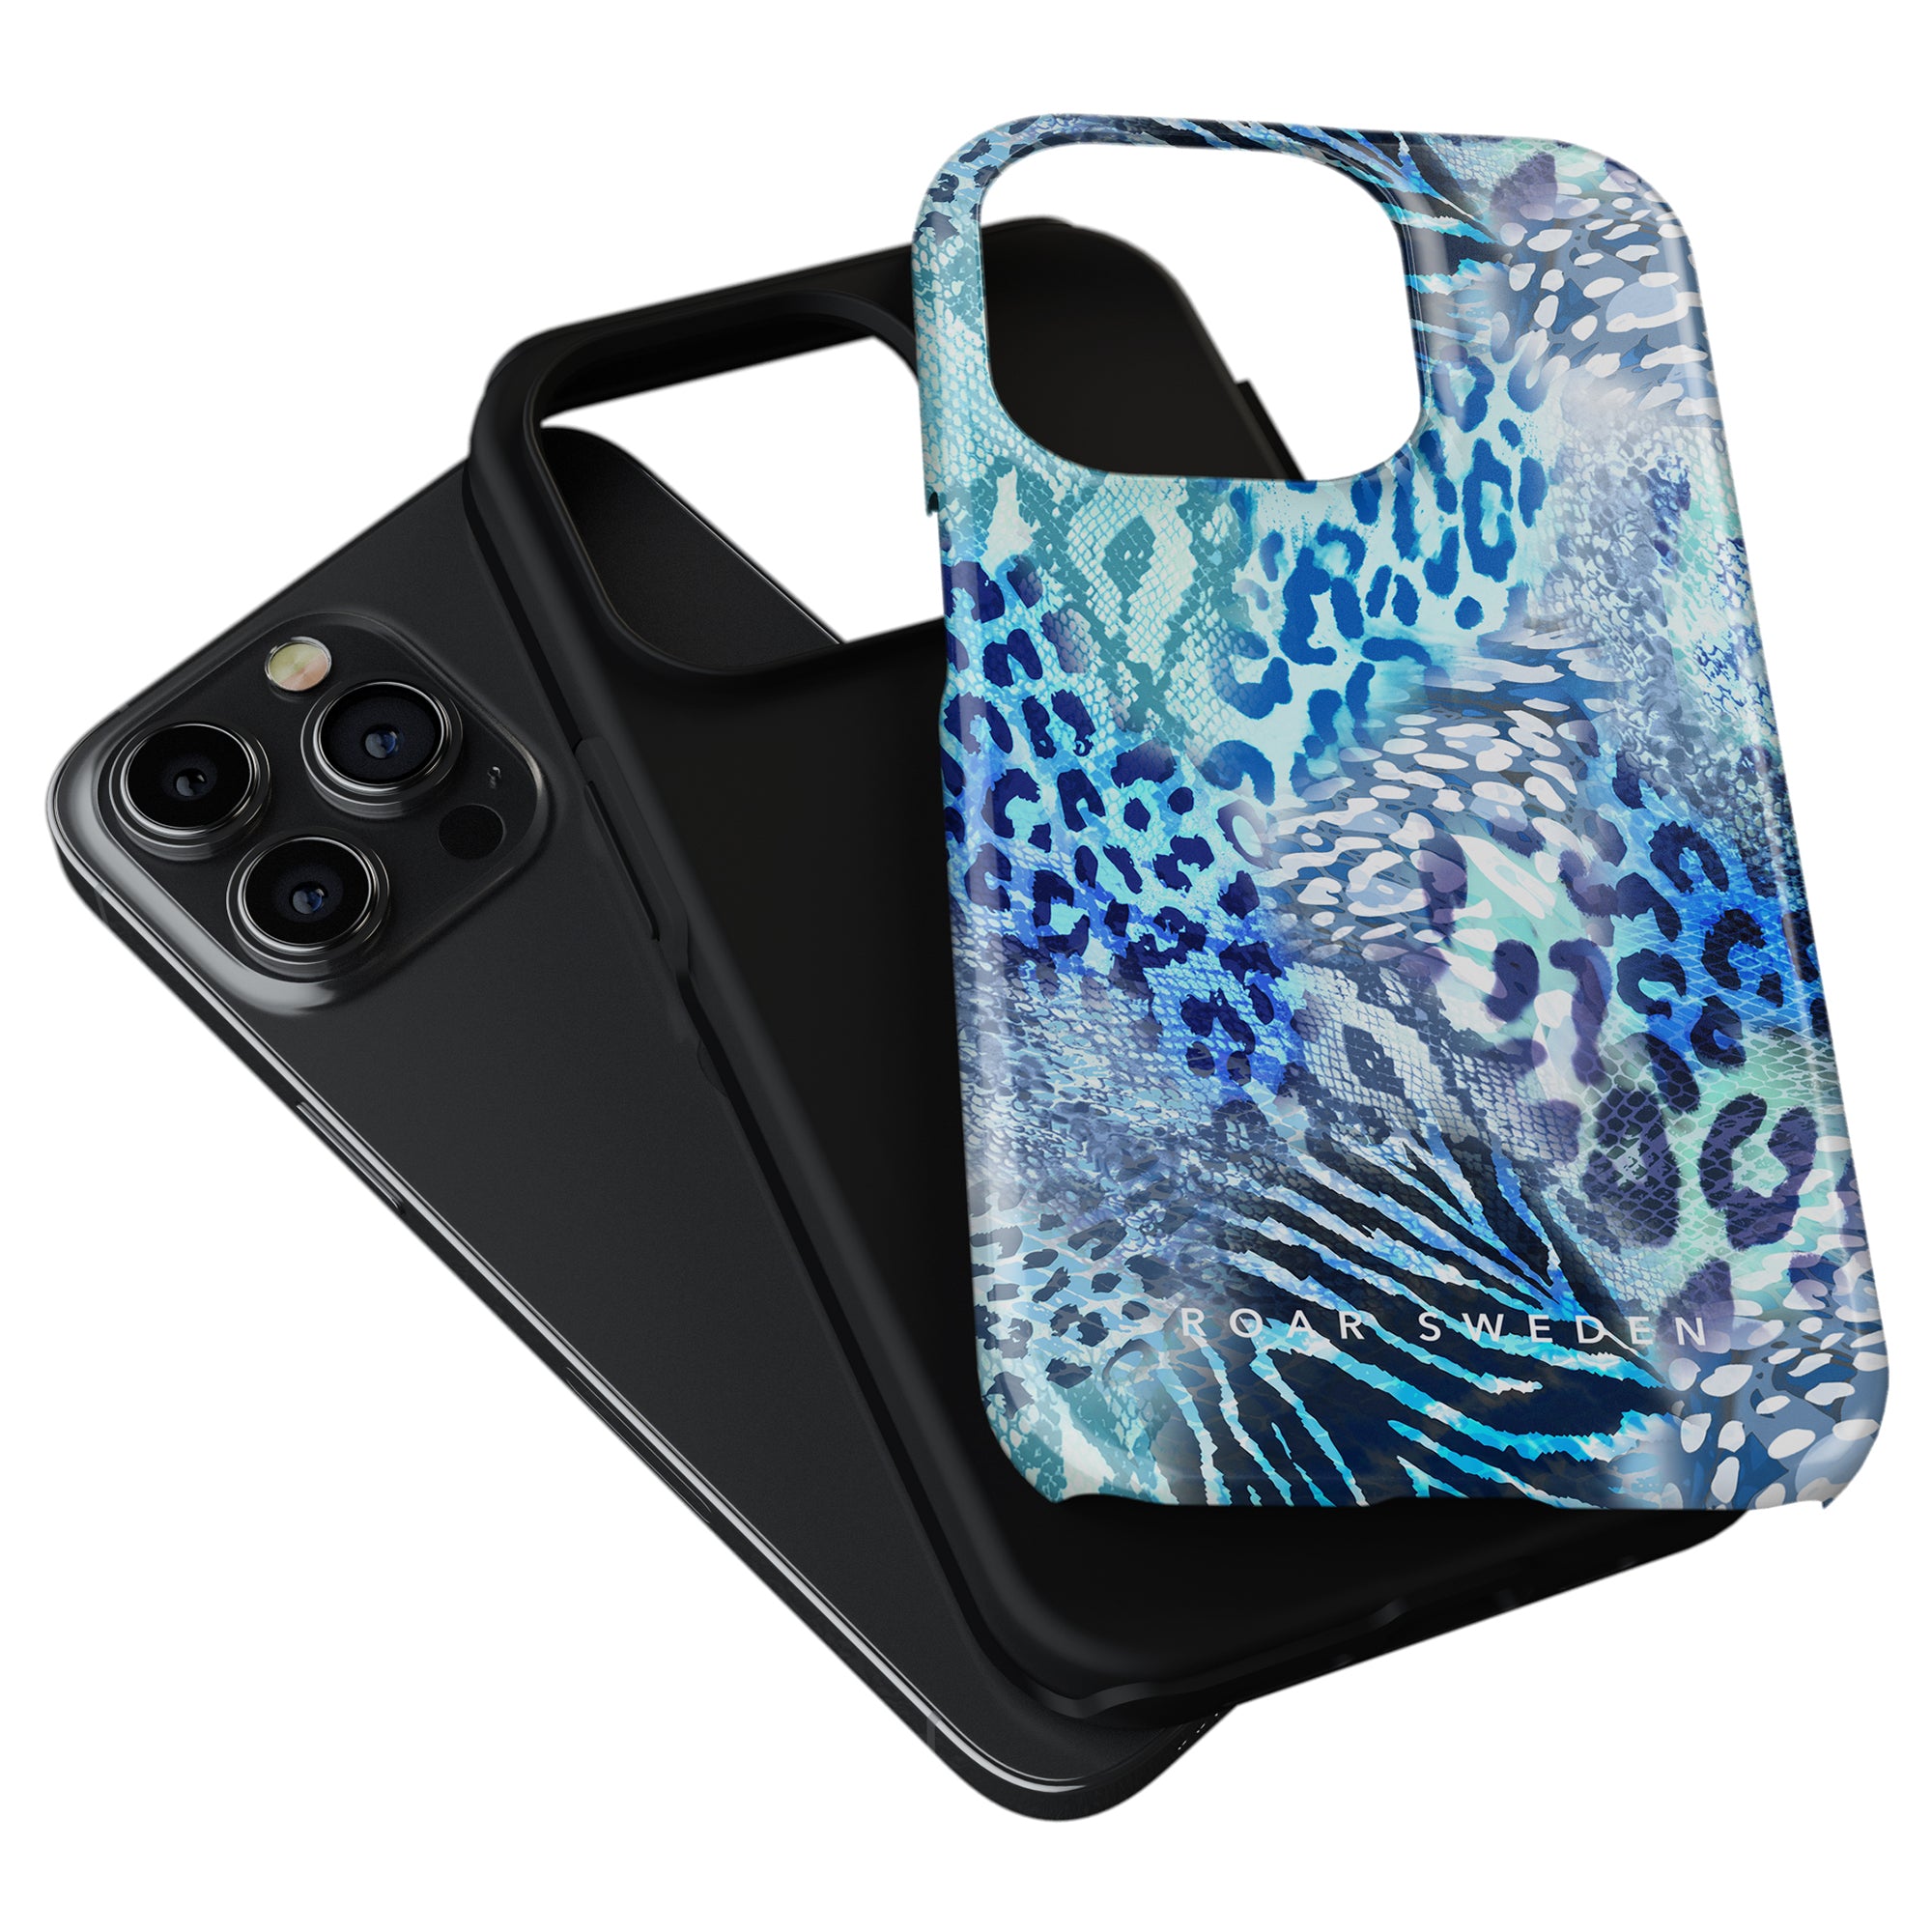 Two iPhone cases: one solid black and the other a vibrant Snow Leopard - Tough Case design with a blue and multicolor animal print pattern, both positioned near an iPhone with triple camera lenses. These tough cases provide stylish protection for your device.